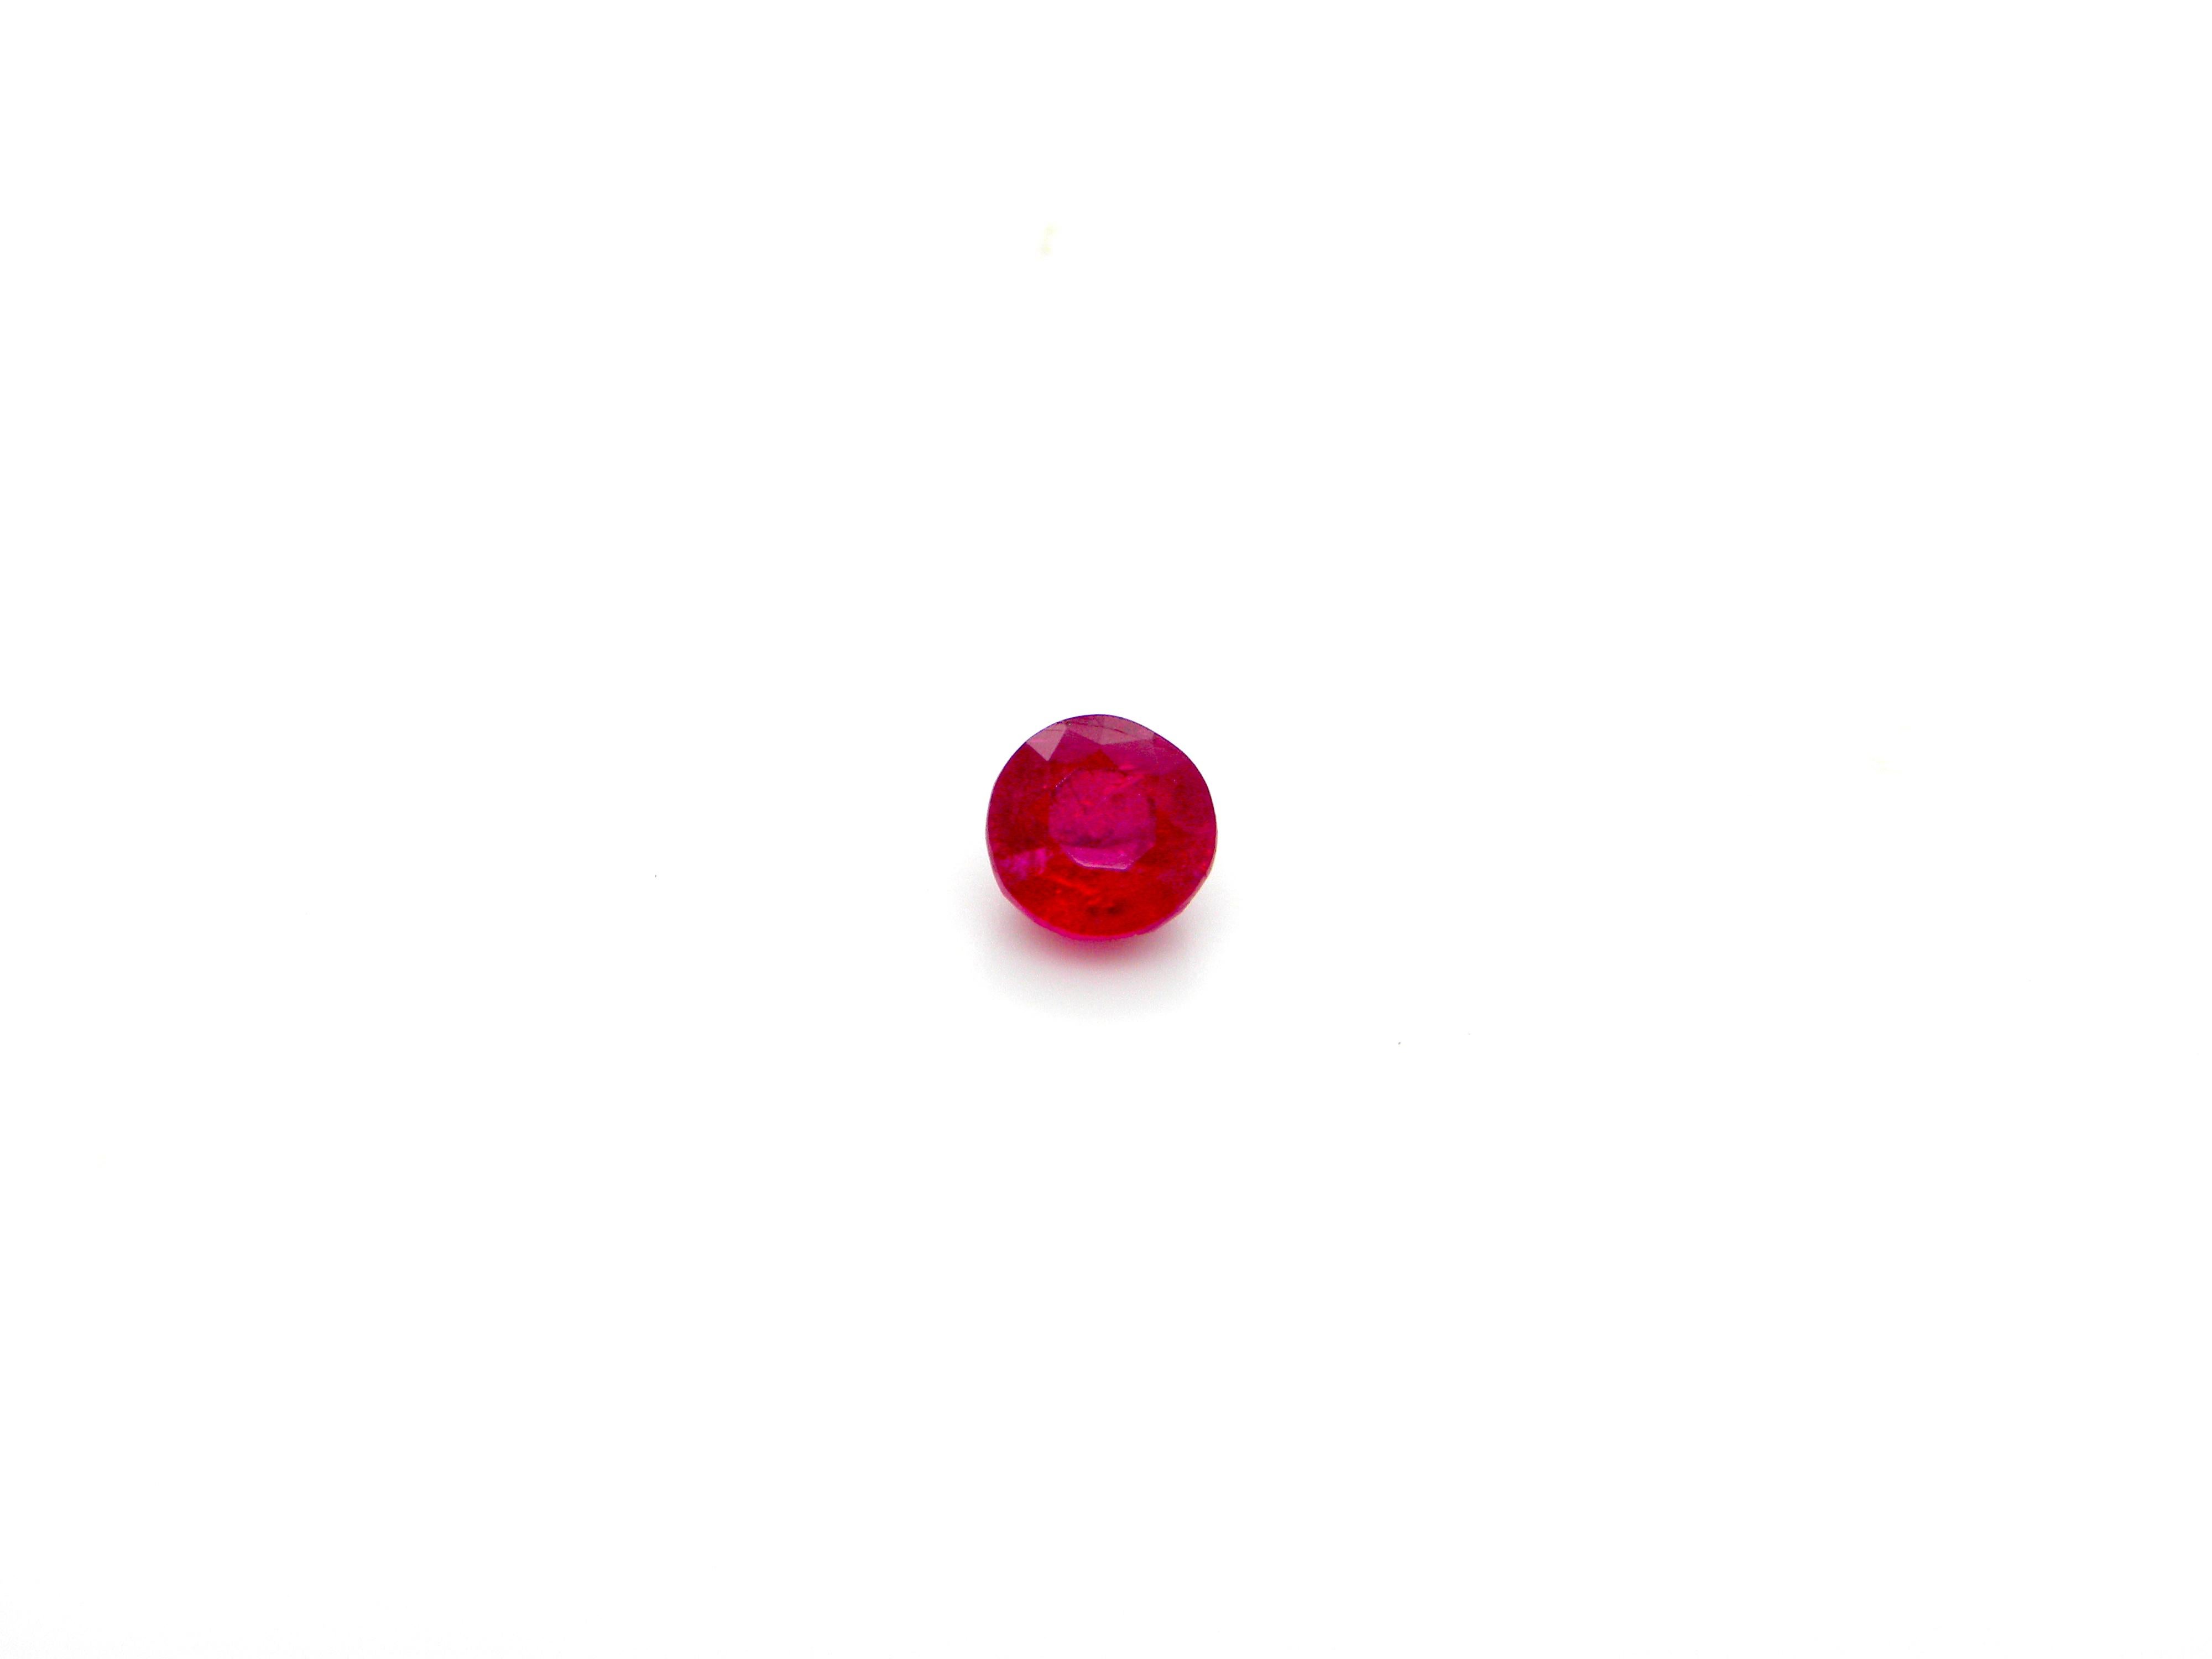 1.12 Carat GIA Certified Pigeon's Blood Red Unheated Round-Cut Burmese Ruby:

An incredibly rare gemstone, it is a 1.12 carat unheated round-cut Burmese ruby. Certified by GIA Lab to be hailing from the historic Mogok mines in Burma, the ruby